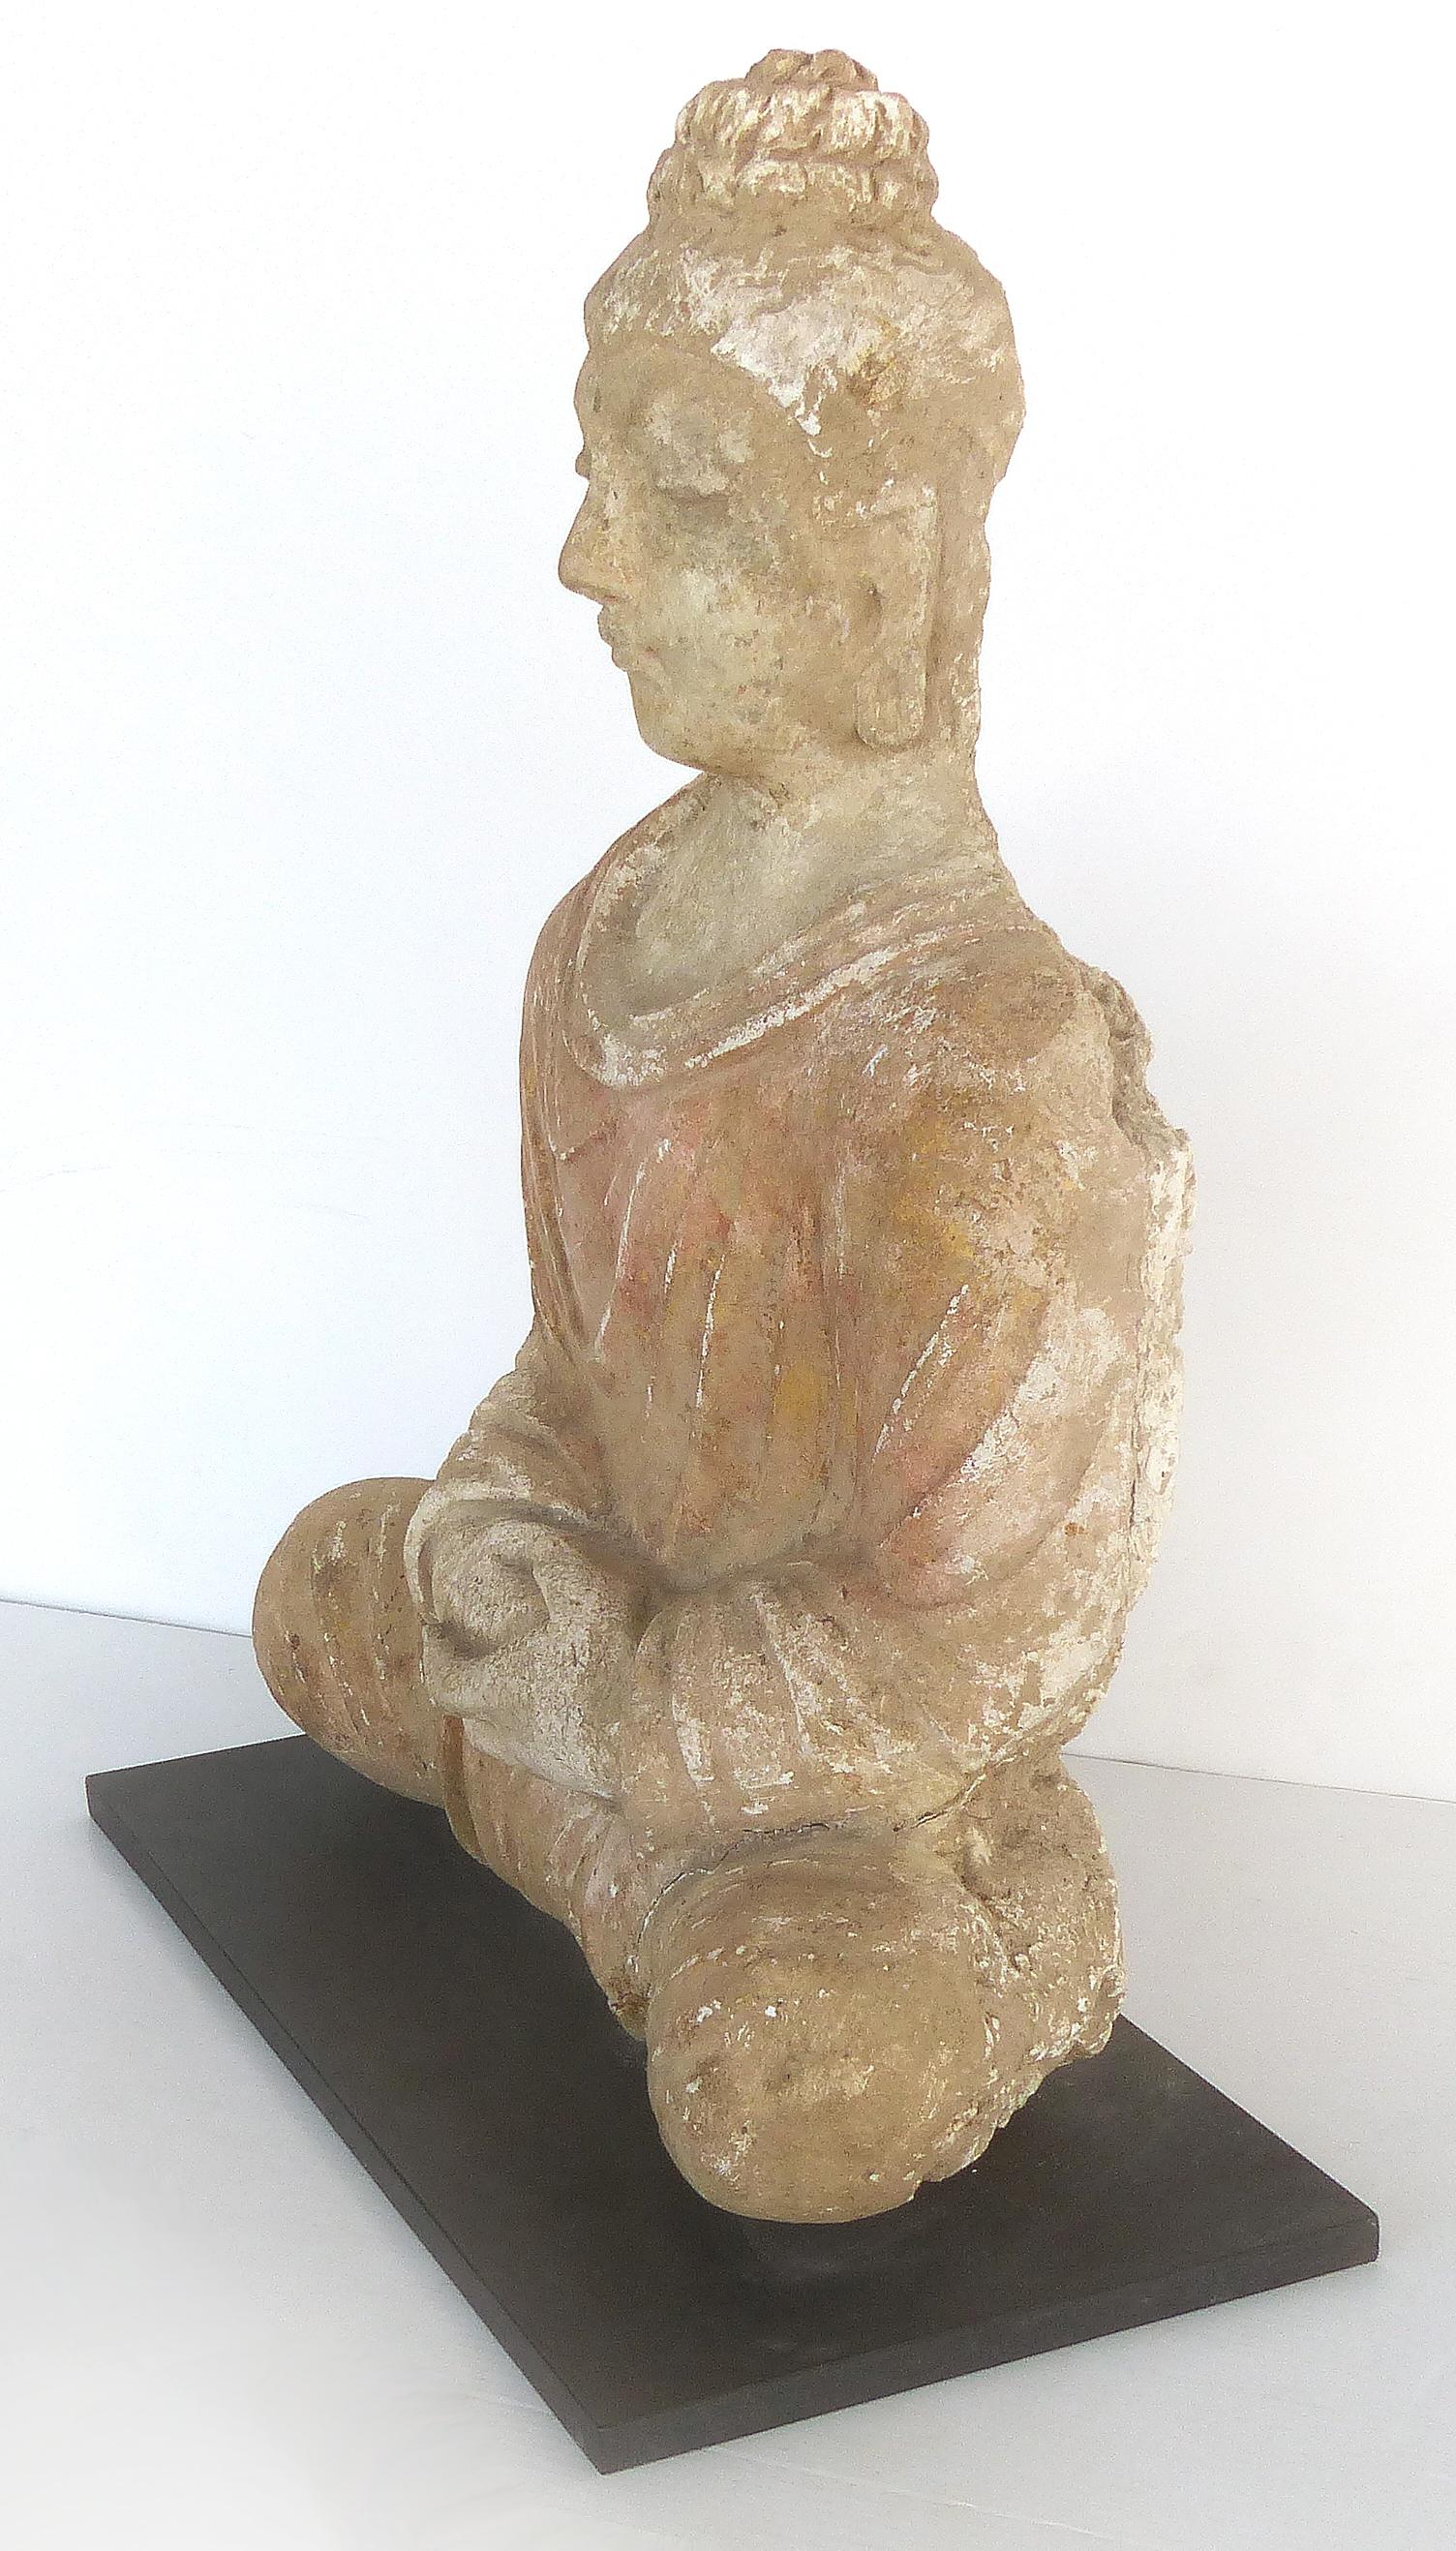 17th century terracotta Buddha, Bangladesh, Provenance Royal-Athena Galleries

Offered for sale is a terracotta seated Buddha from Bangladesh, circa 17th century. This piece was acquired by the previous owner at the renowned Royal-Athena Galleries